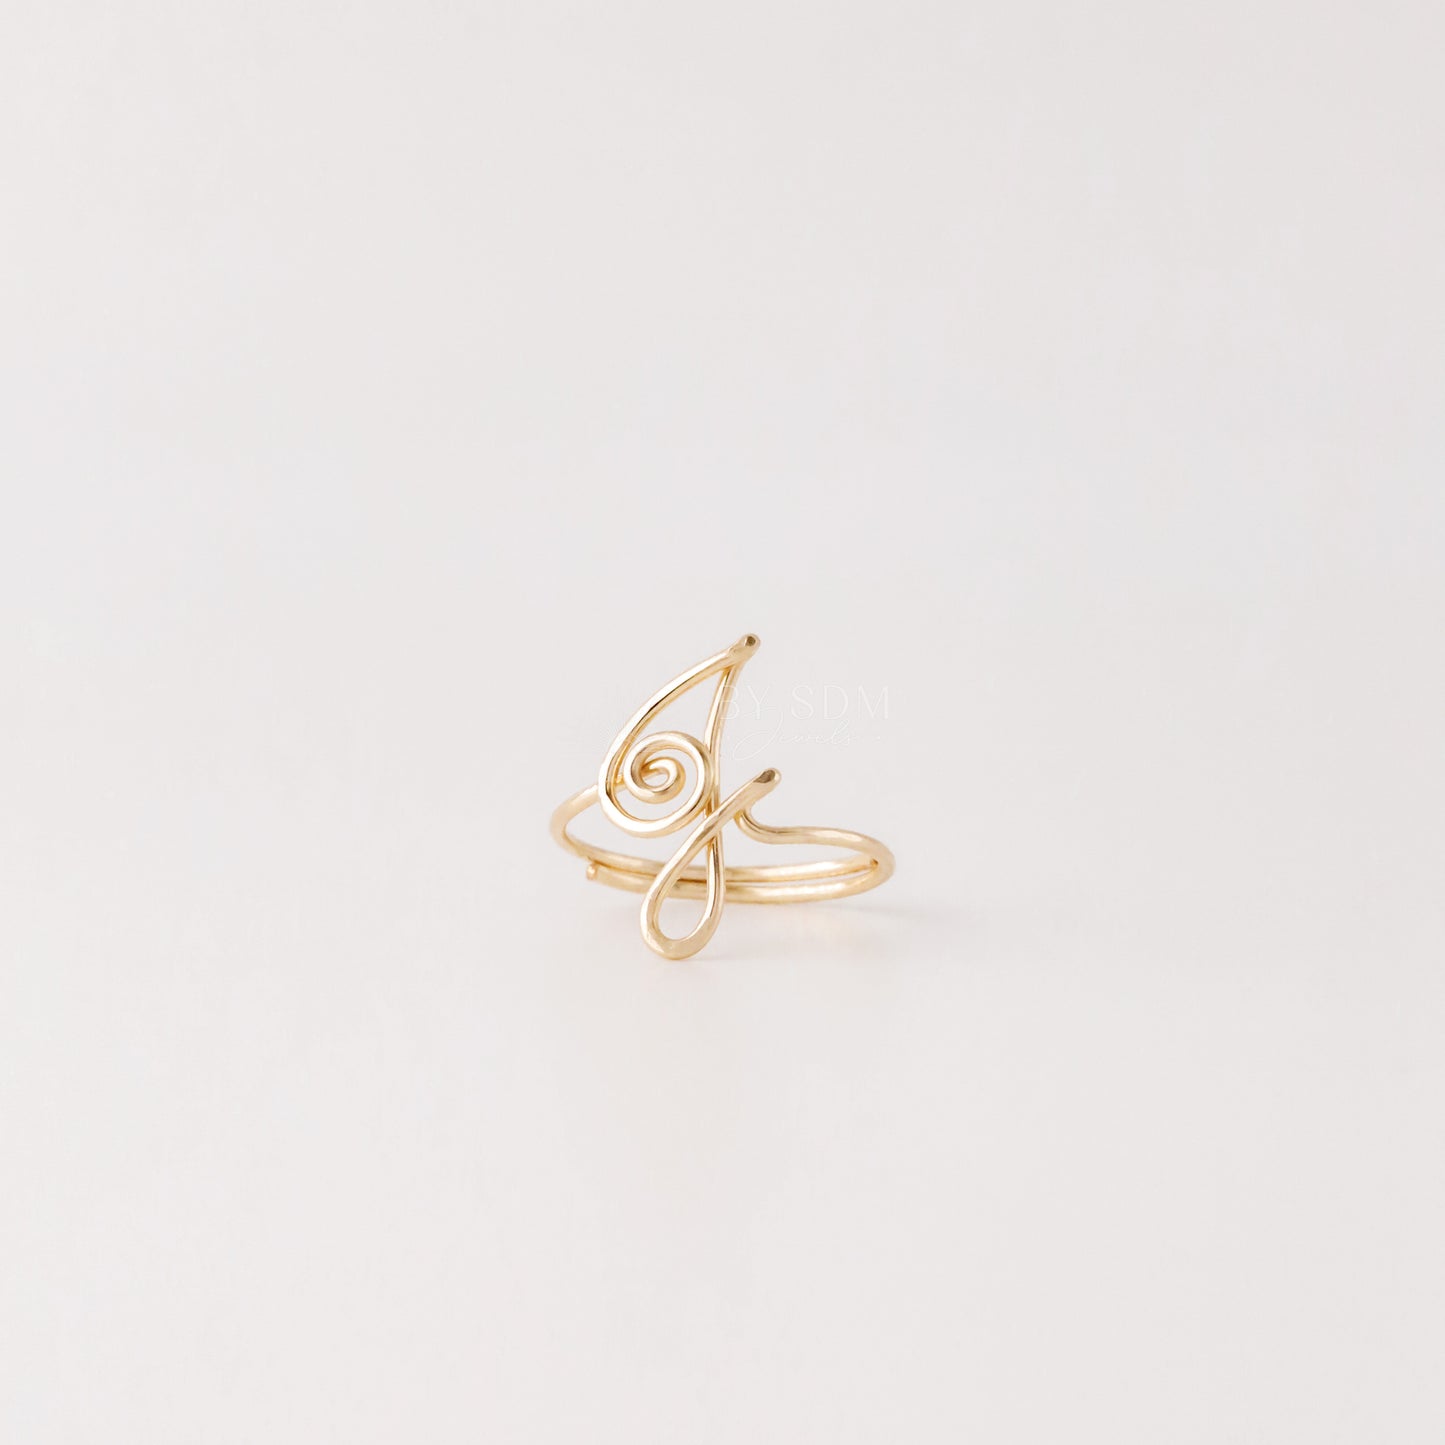 Dainty Initial J Ring • Custom Letter Ring in Sterling Silver, Gold & Rose Gold • Uppercase Initial Ring • Bridesmaids Gifts • BYSDMJEWELS